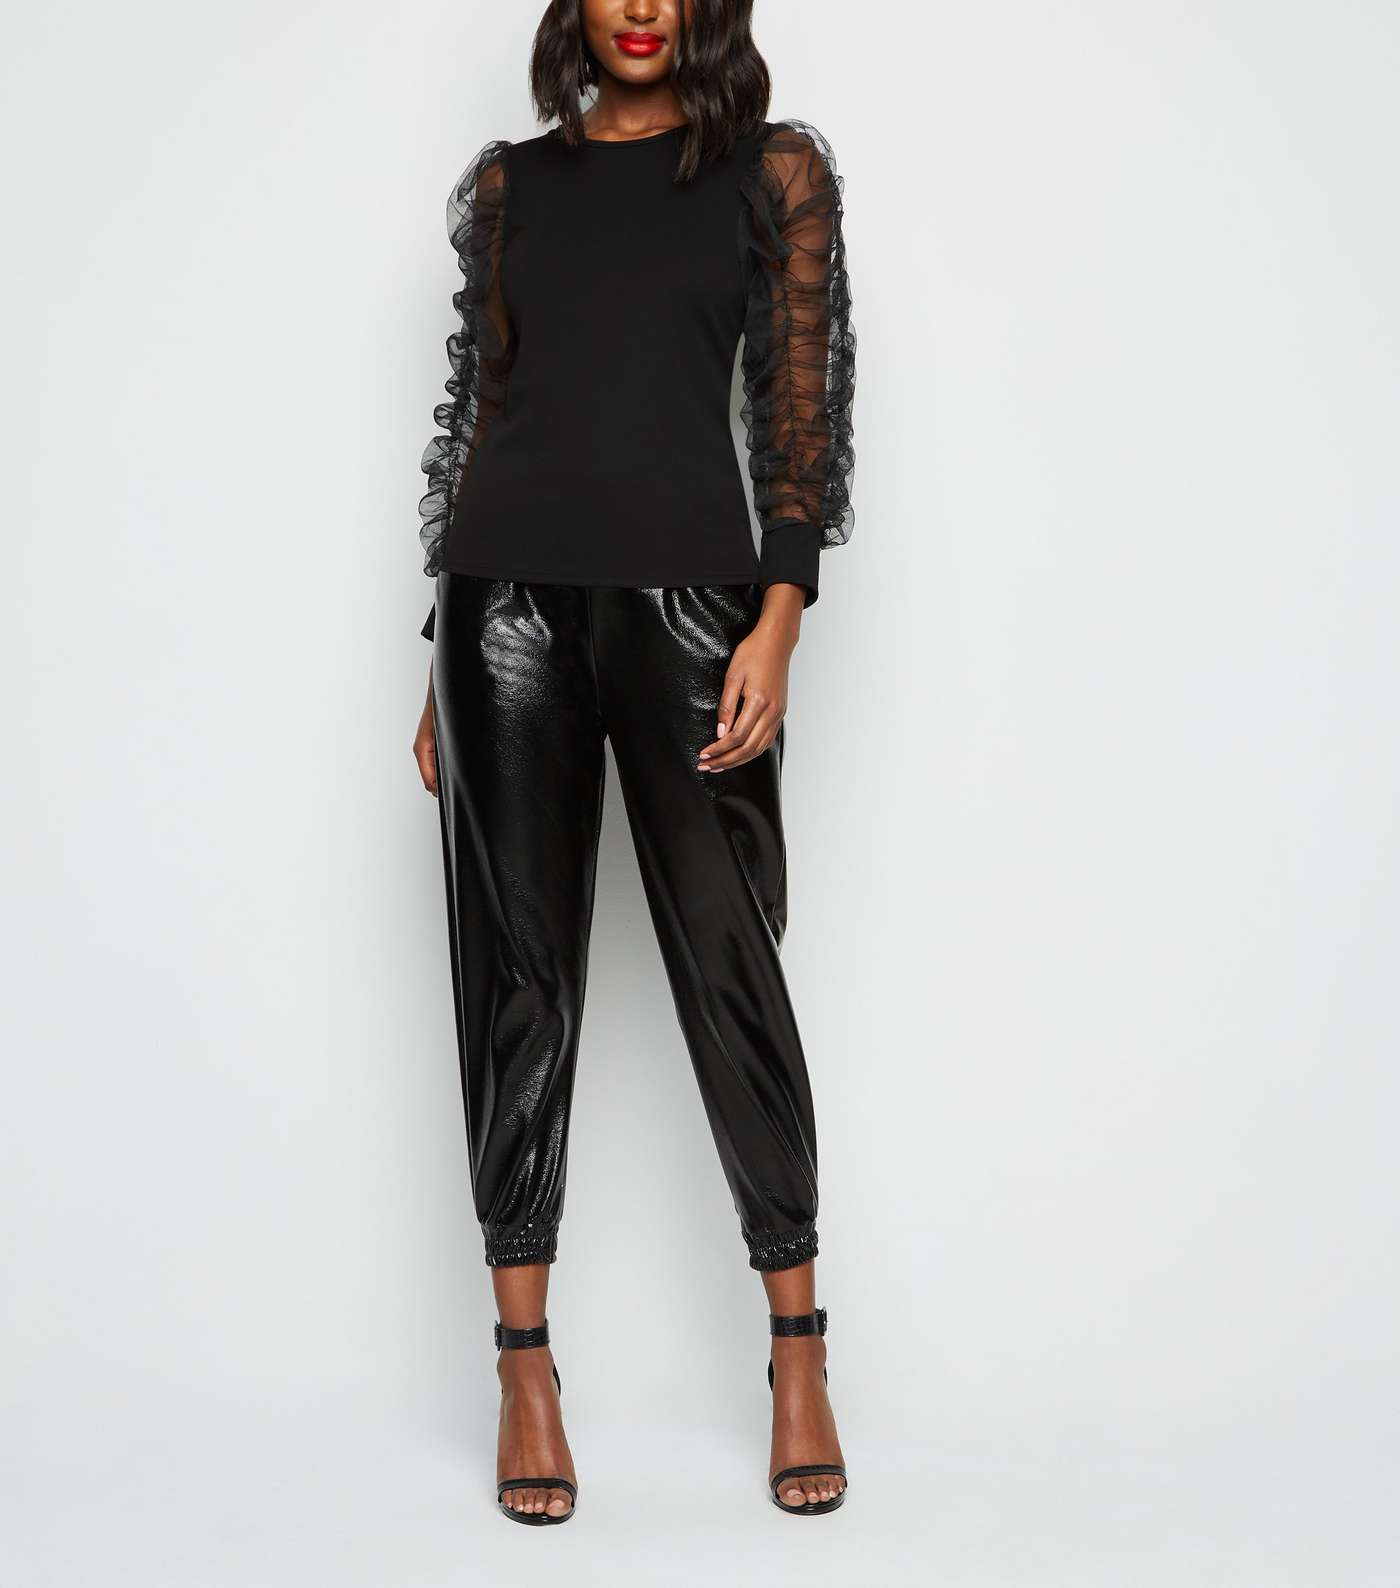 Cameo Rose Black Ruched Mesh Sleeve Top Image 2